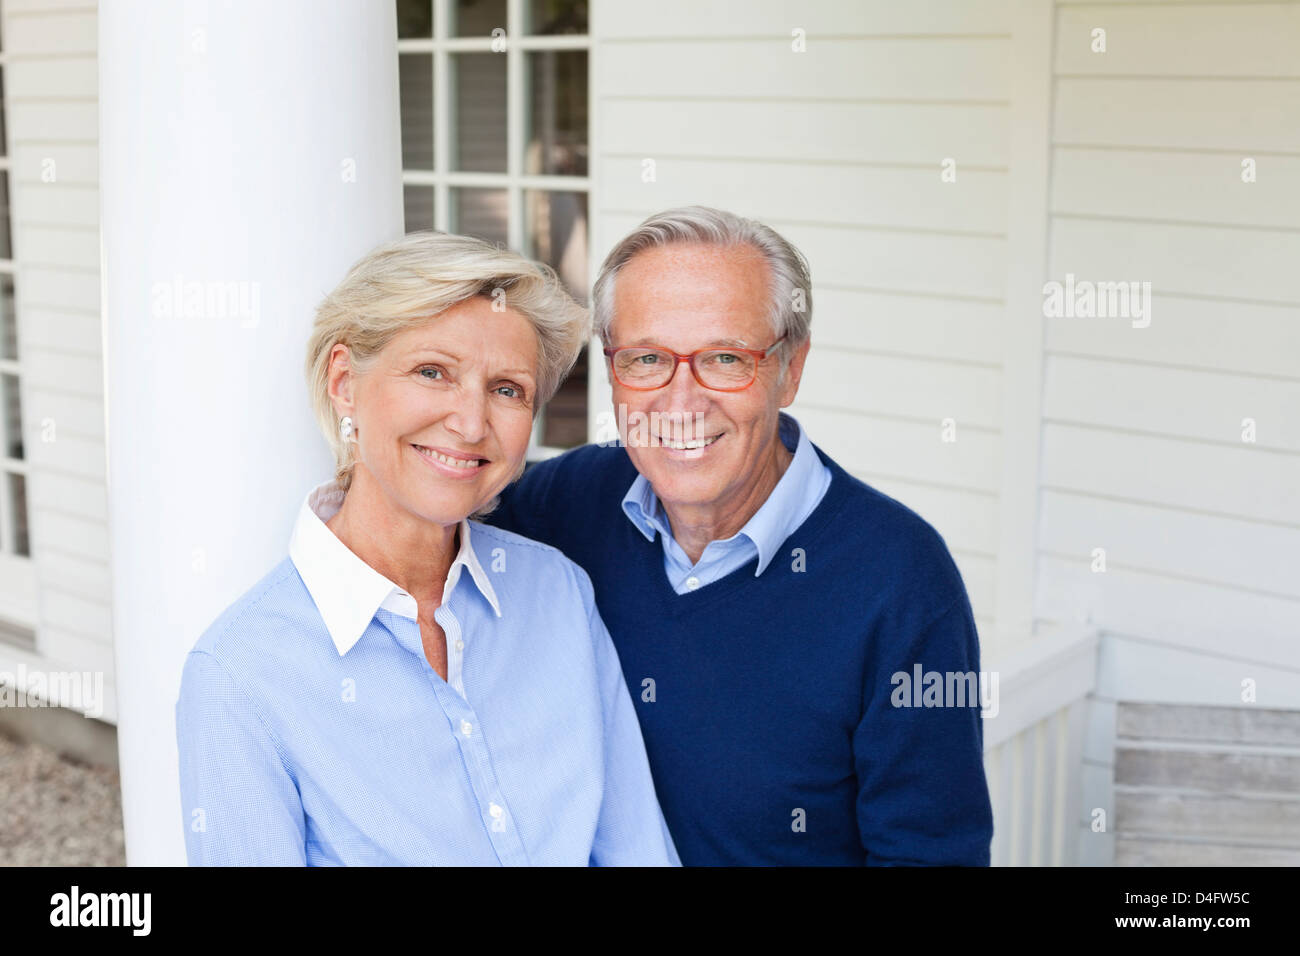 Couple smiling together outdoors Stock Photo